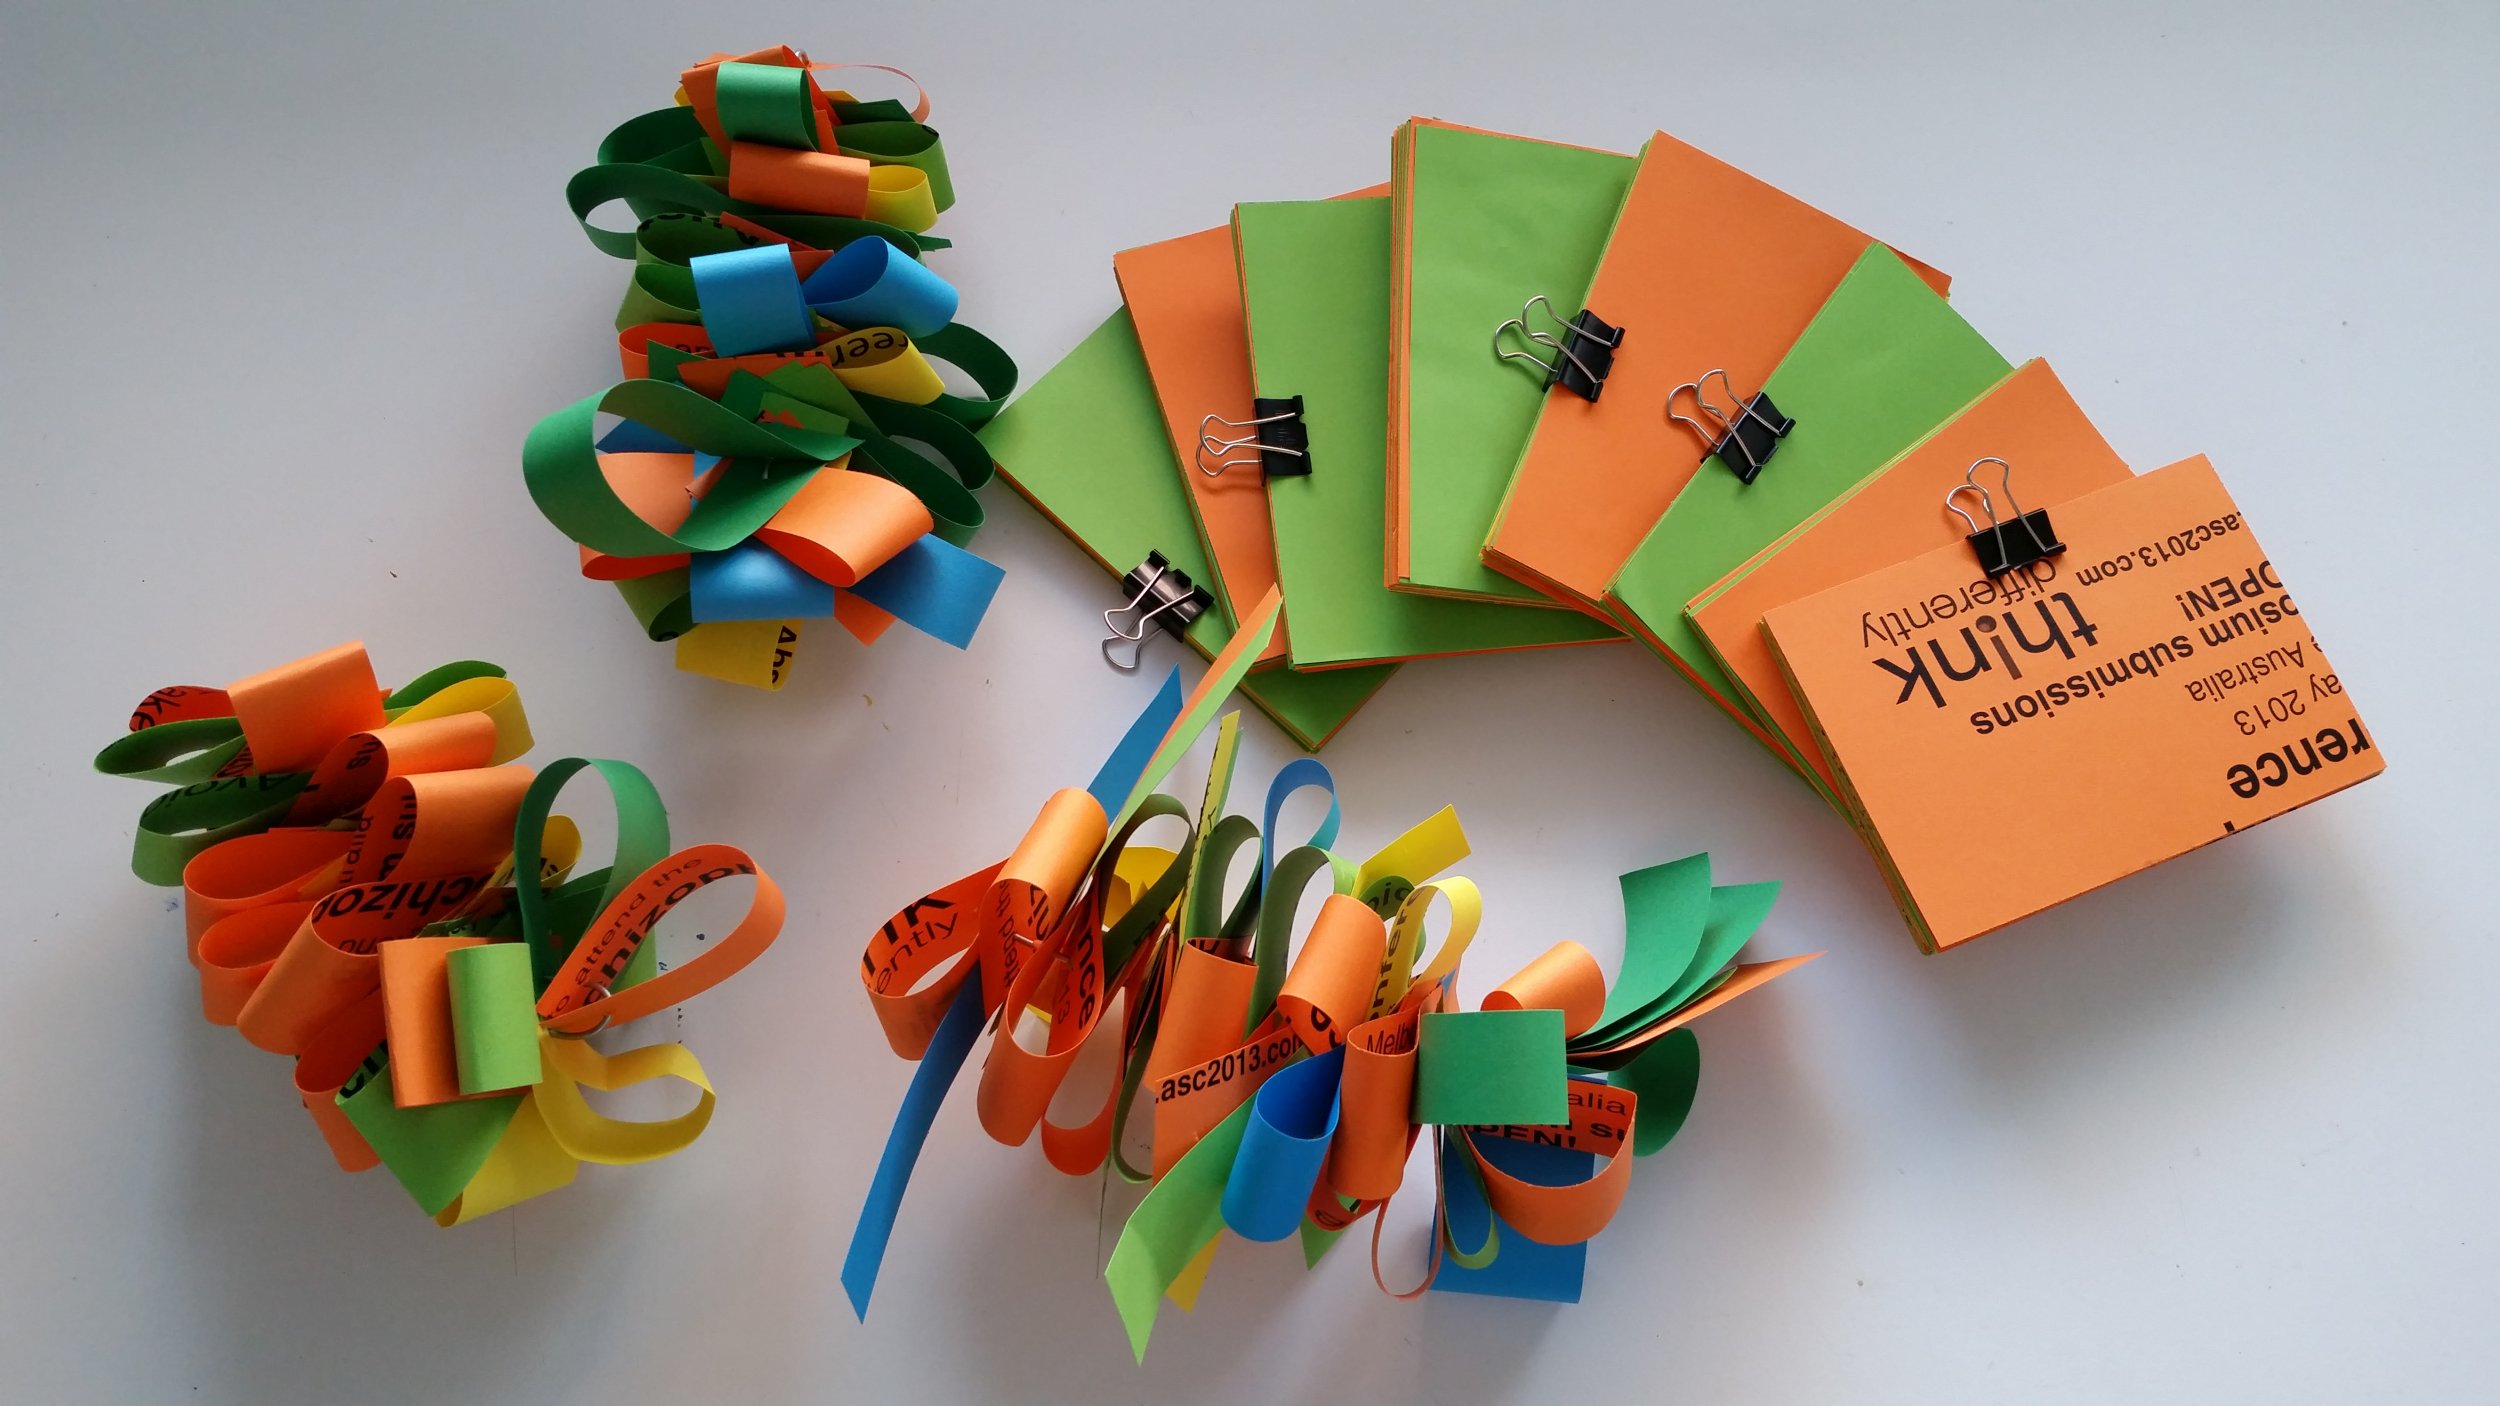 Recycled paper enrichment toys for study budgerigars